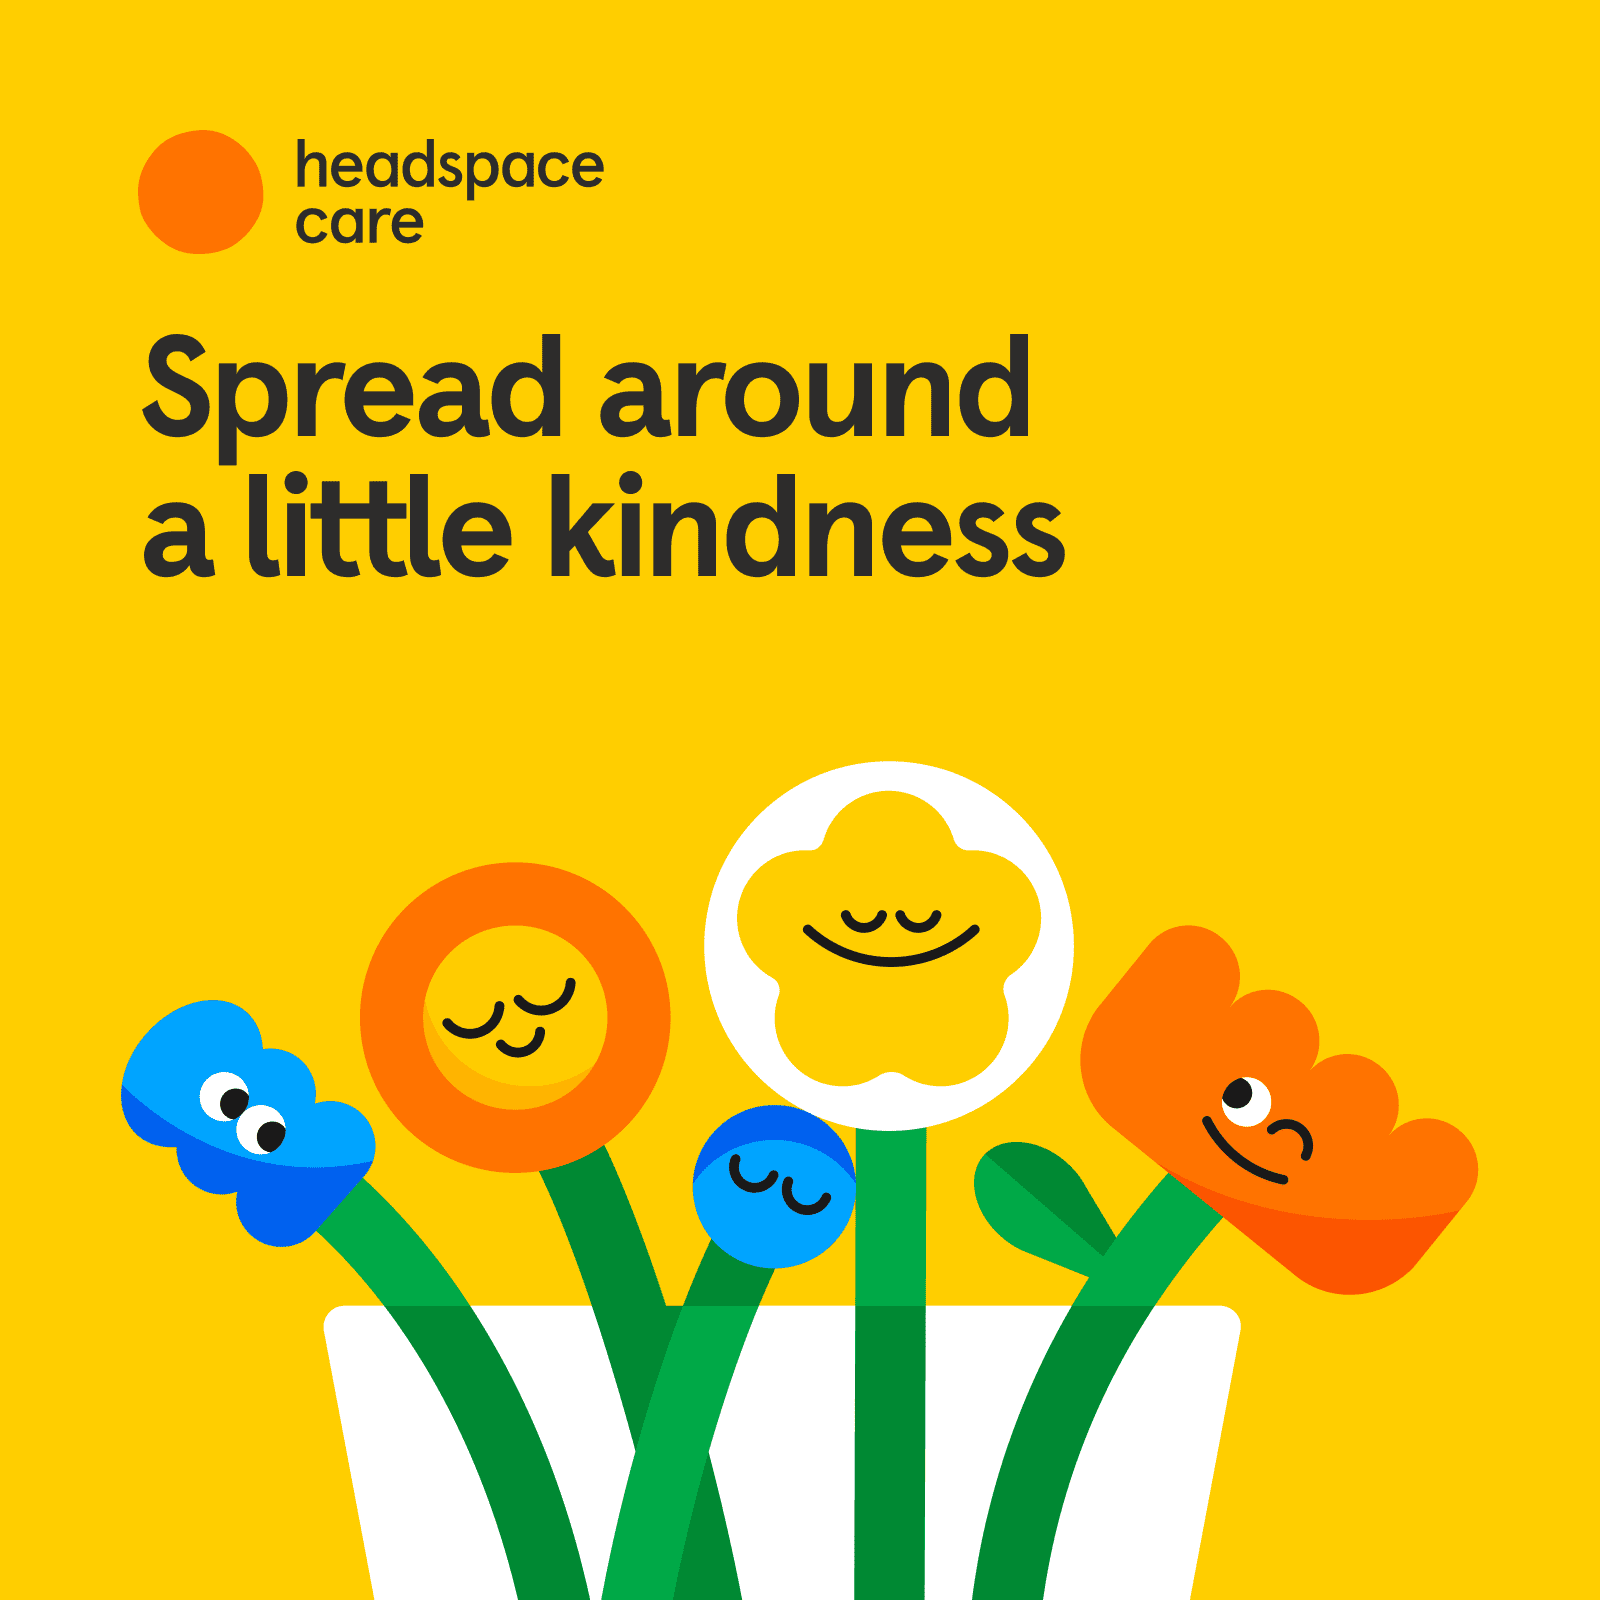 Headspace Care Spread around a little kindness